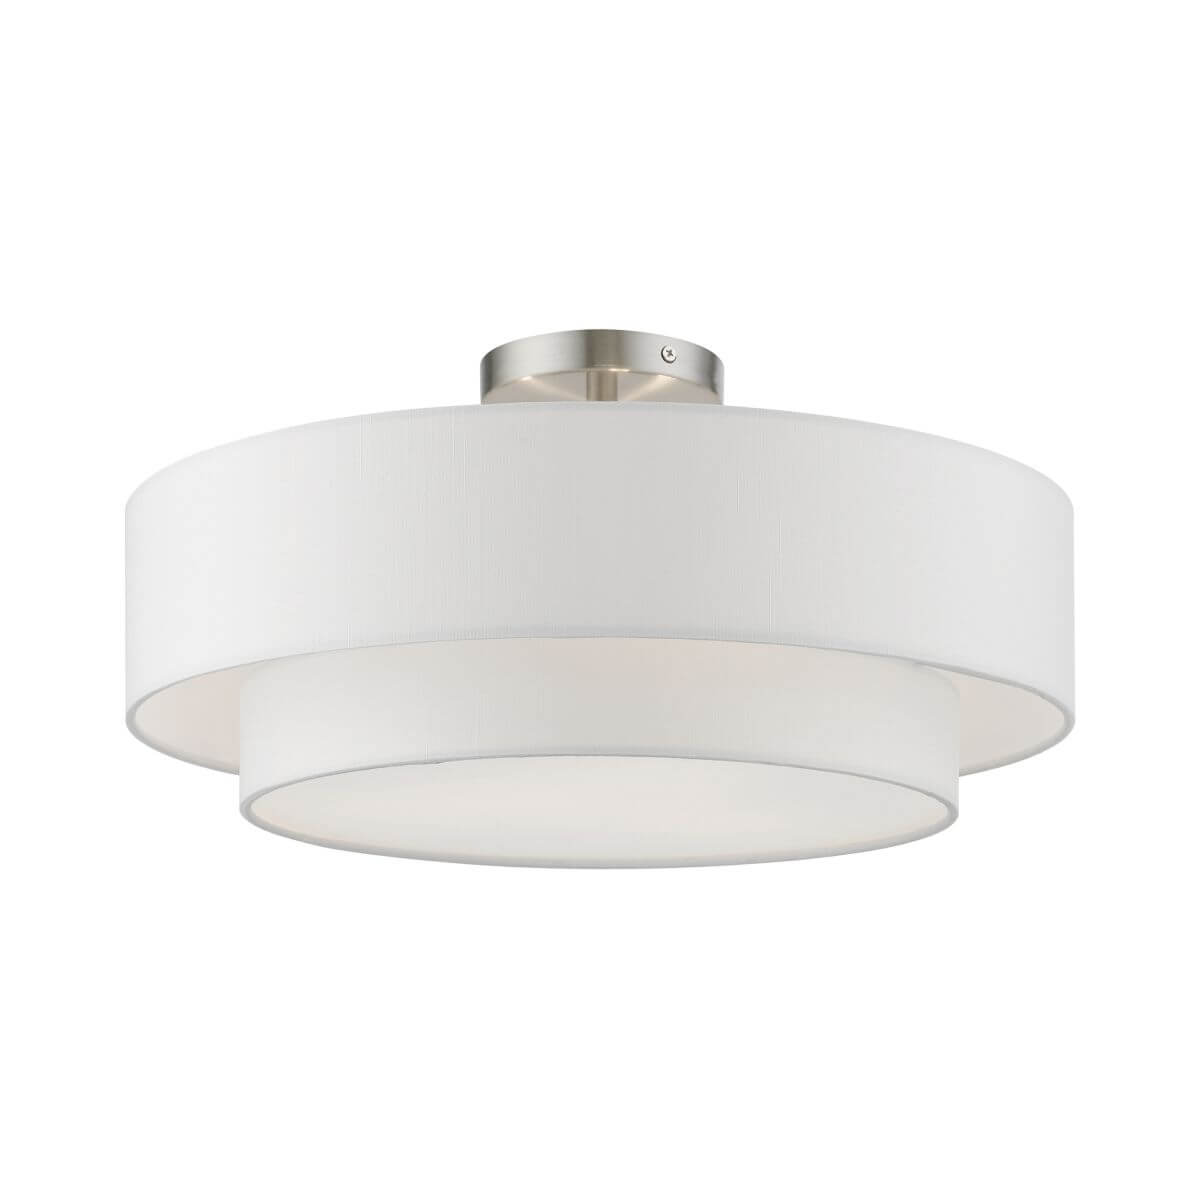 3 Light 18 inch Semi-Flush Mount in Brushed Nickel with Hand Crafted Off-white Hardback Fabric Shade - White Fabric Inside - 245319